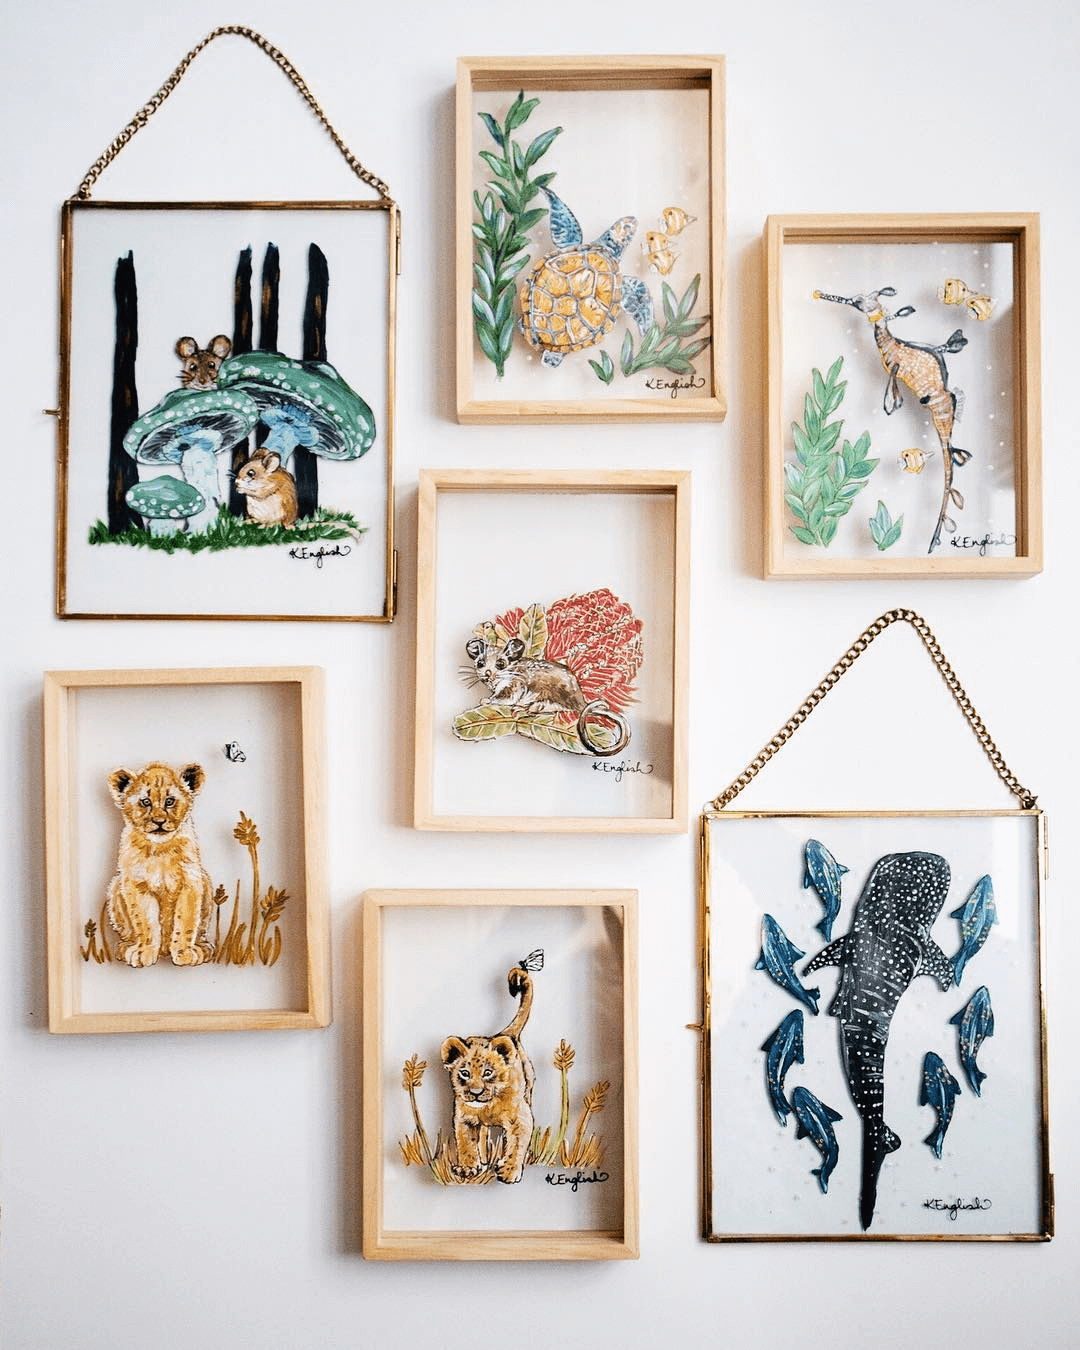 Glass animal portraits in a realistic painting style hanging on a white wall.